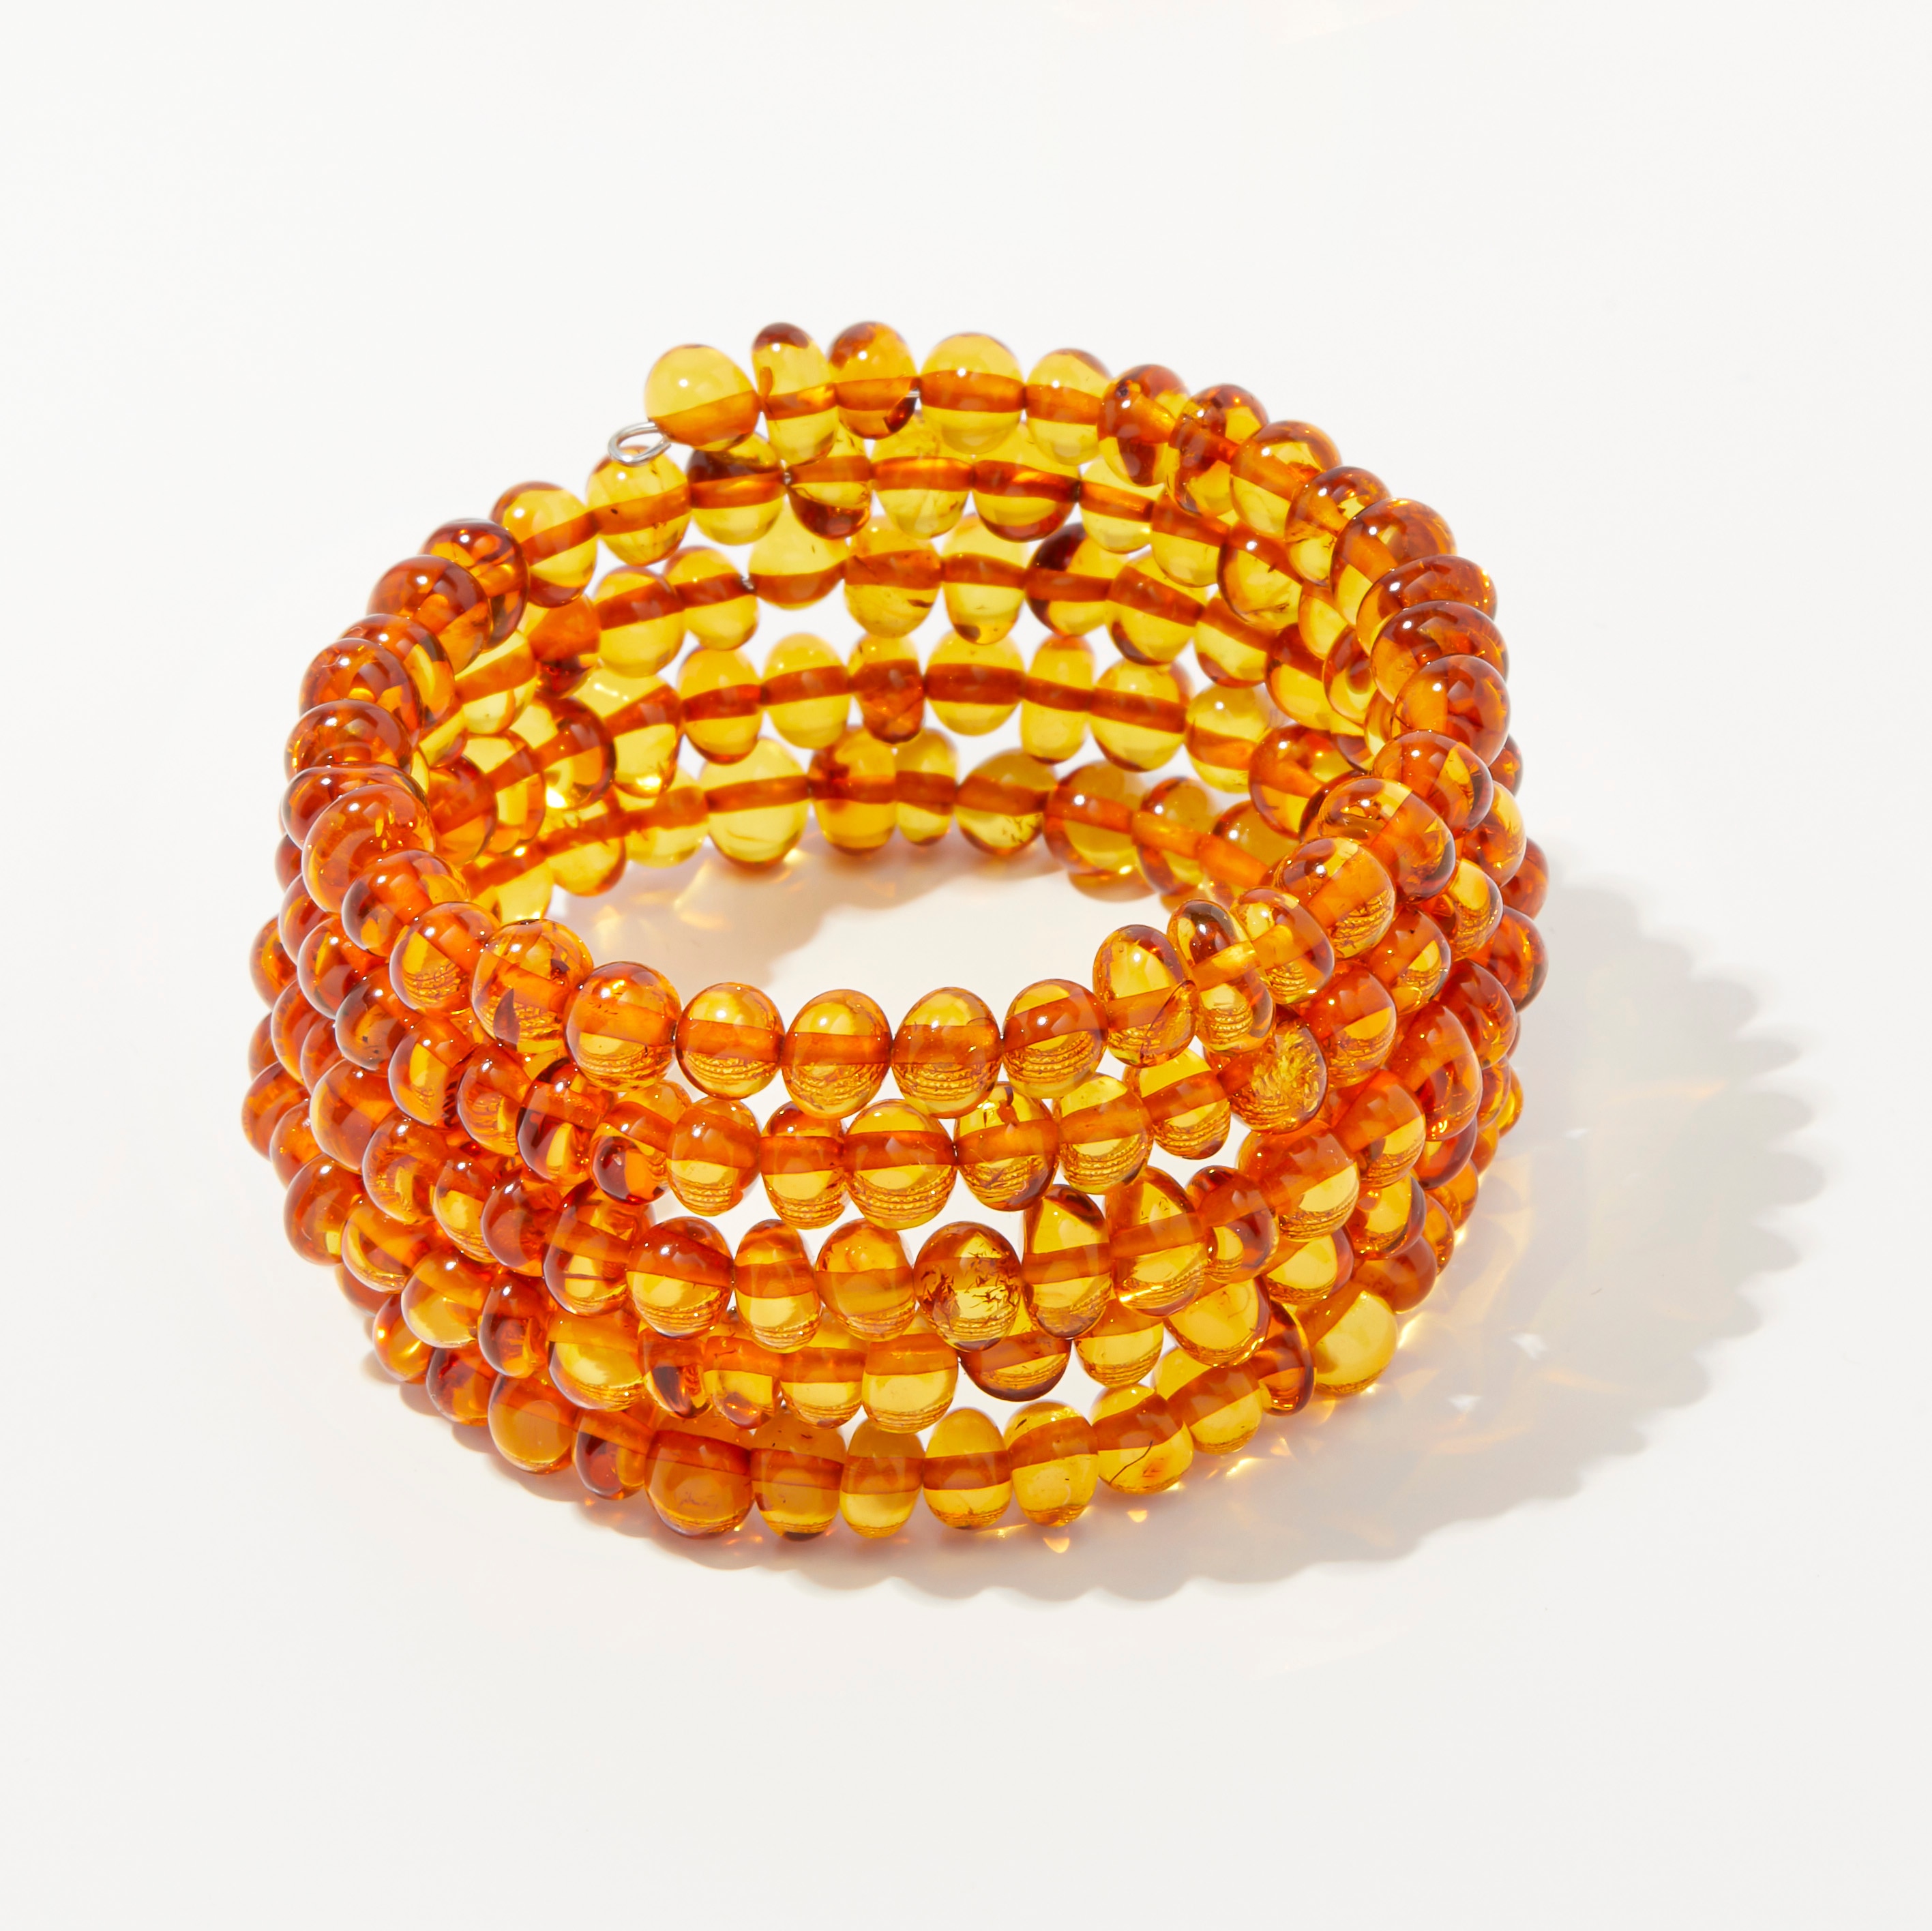 Lucite amber waves and - Gem